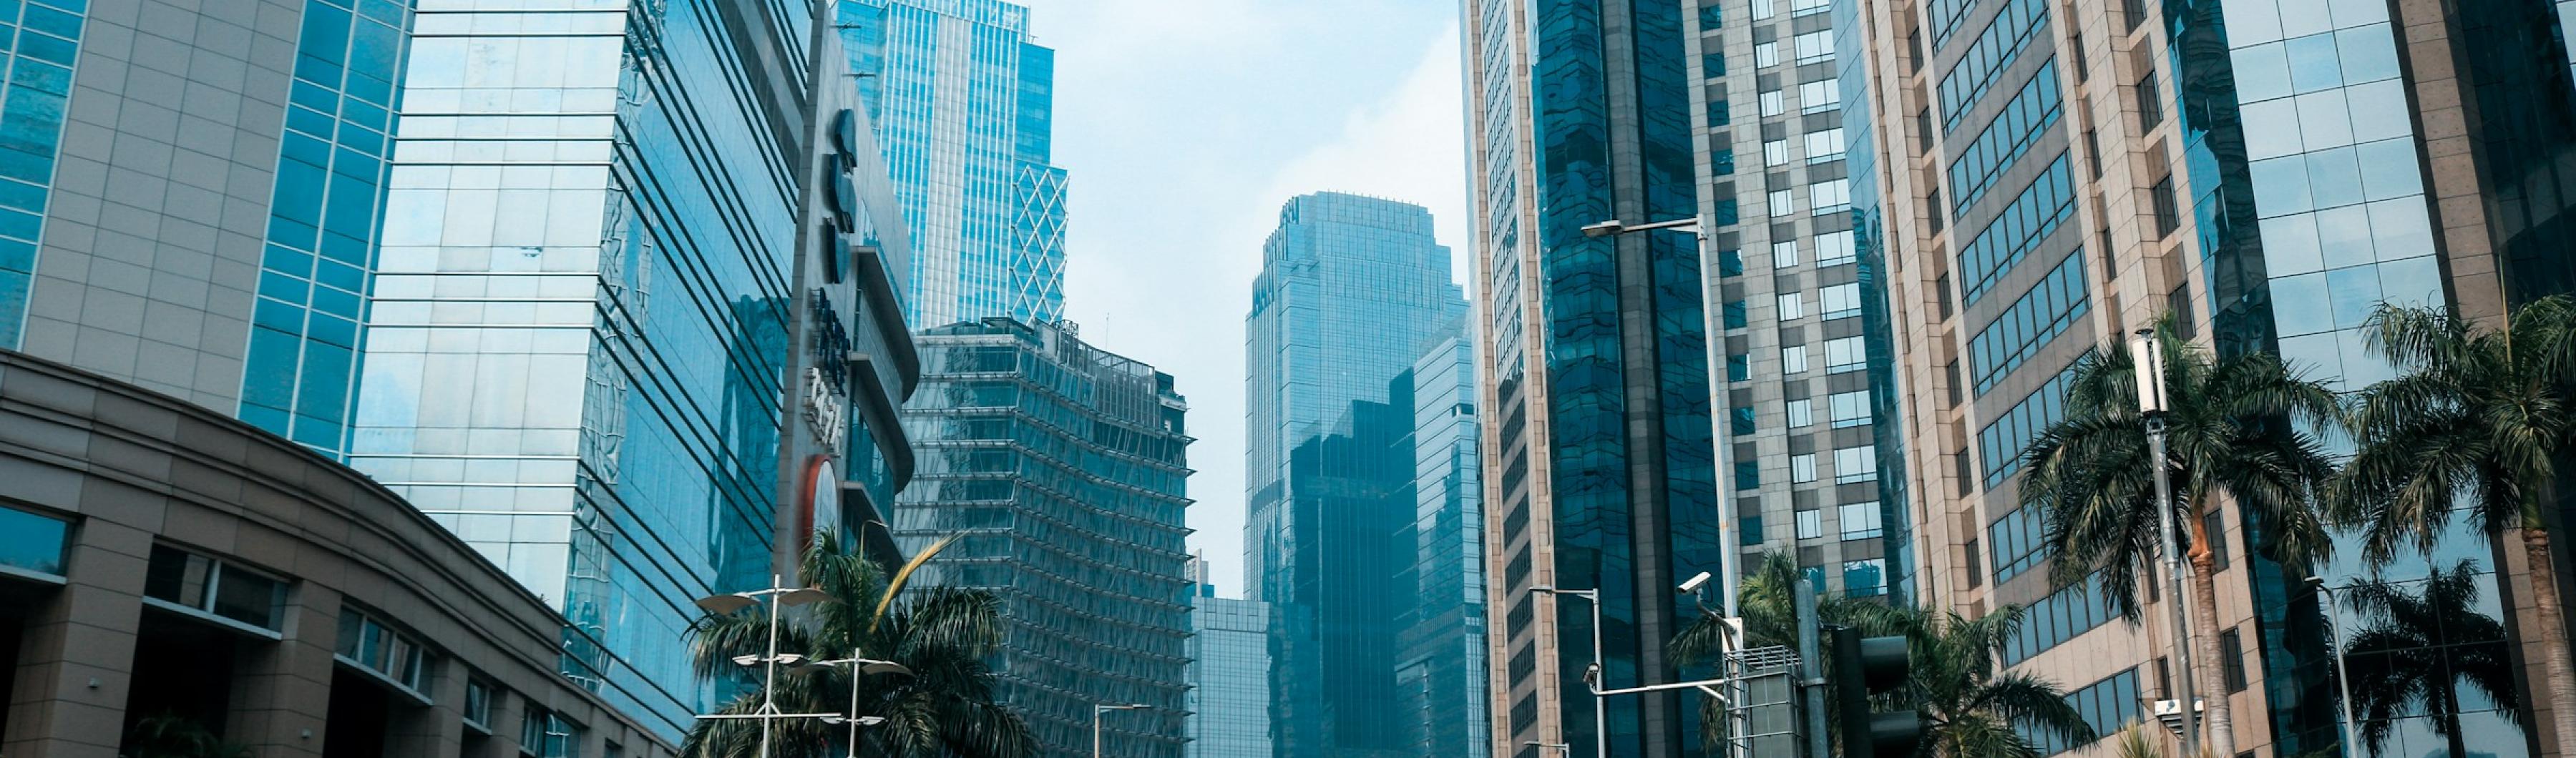 a view of jakarta; tall buildings line a major road, and palm trees are in the foreground.